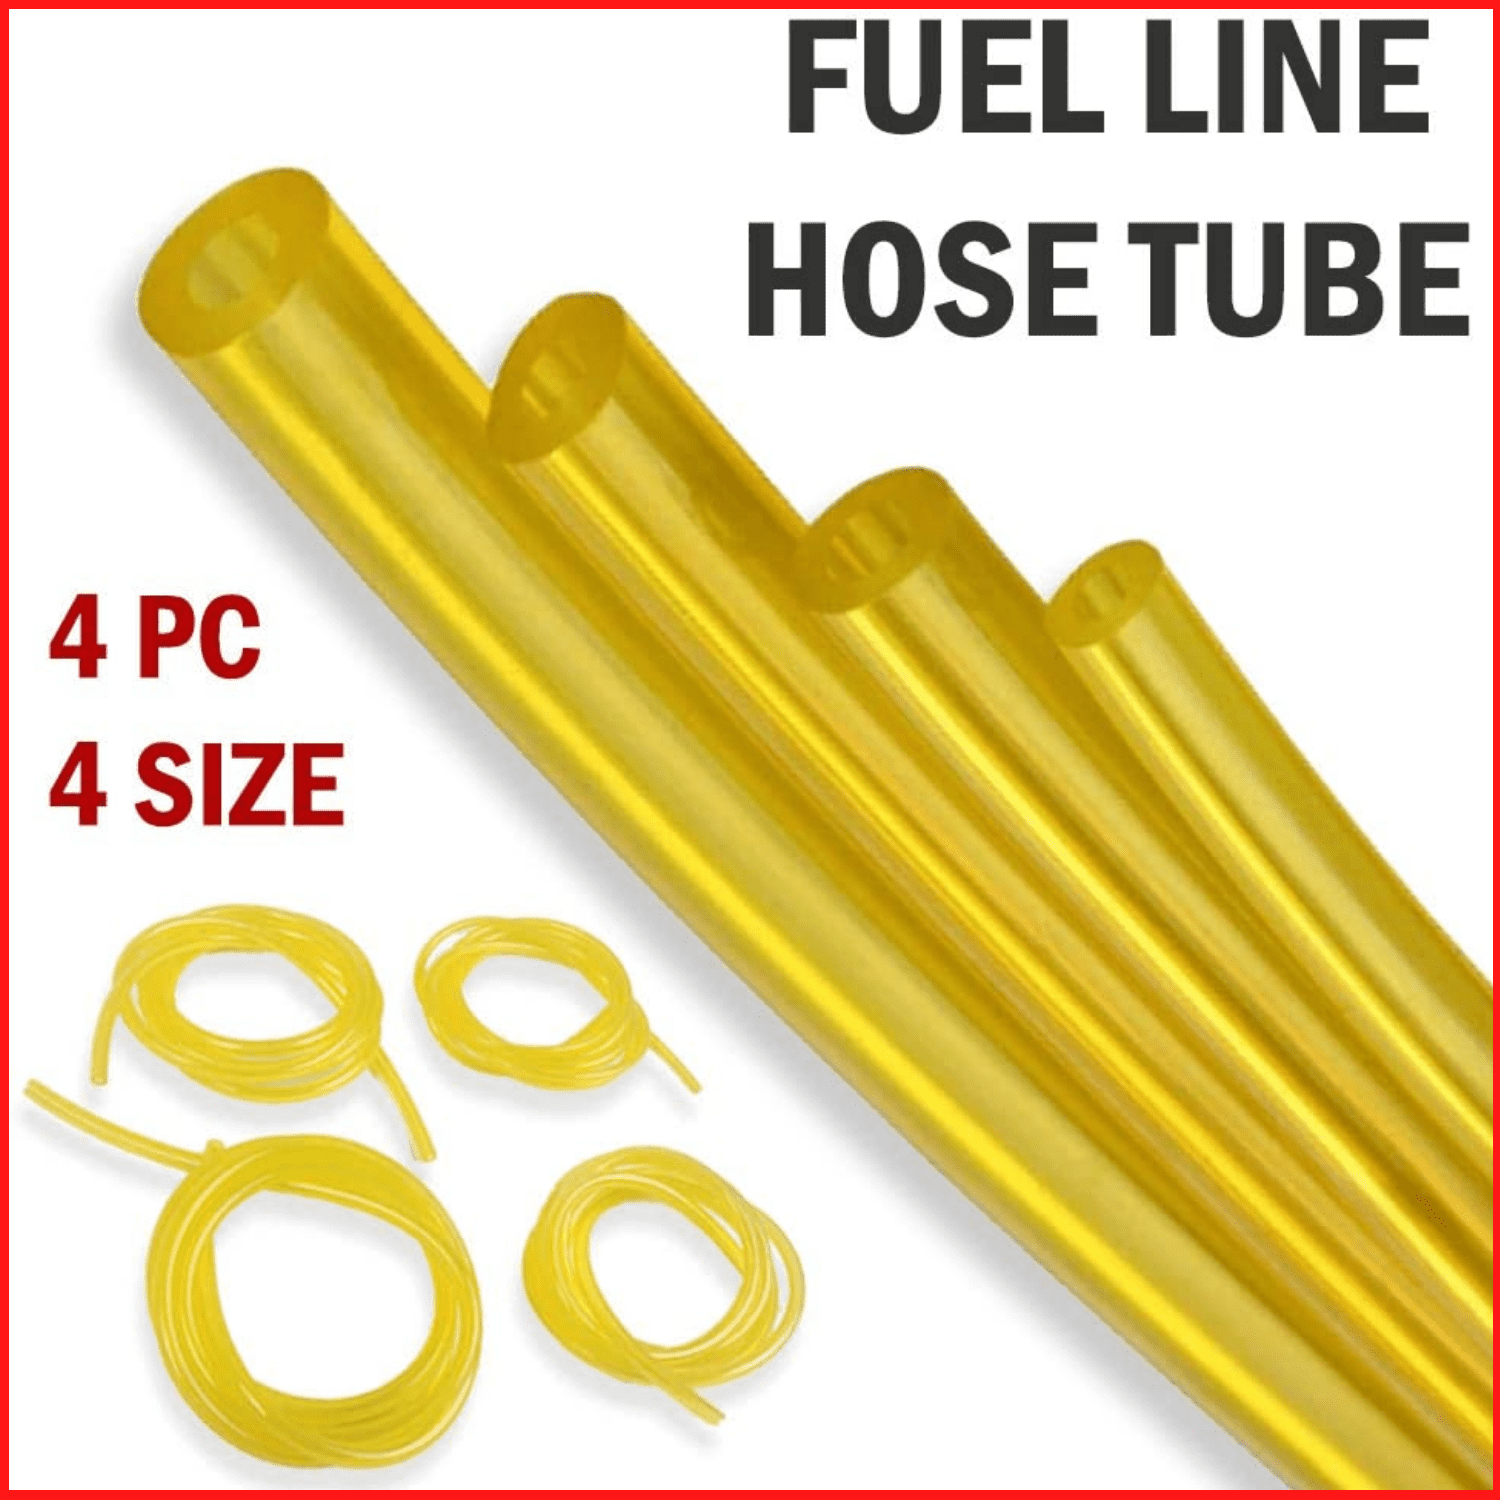 Details about   3m Fuel Line Hose Gas Pipe Petrol Trimmer Chainsaw Blower 4 Tubing Sizes Tools 